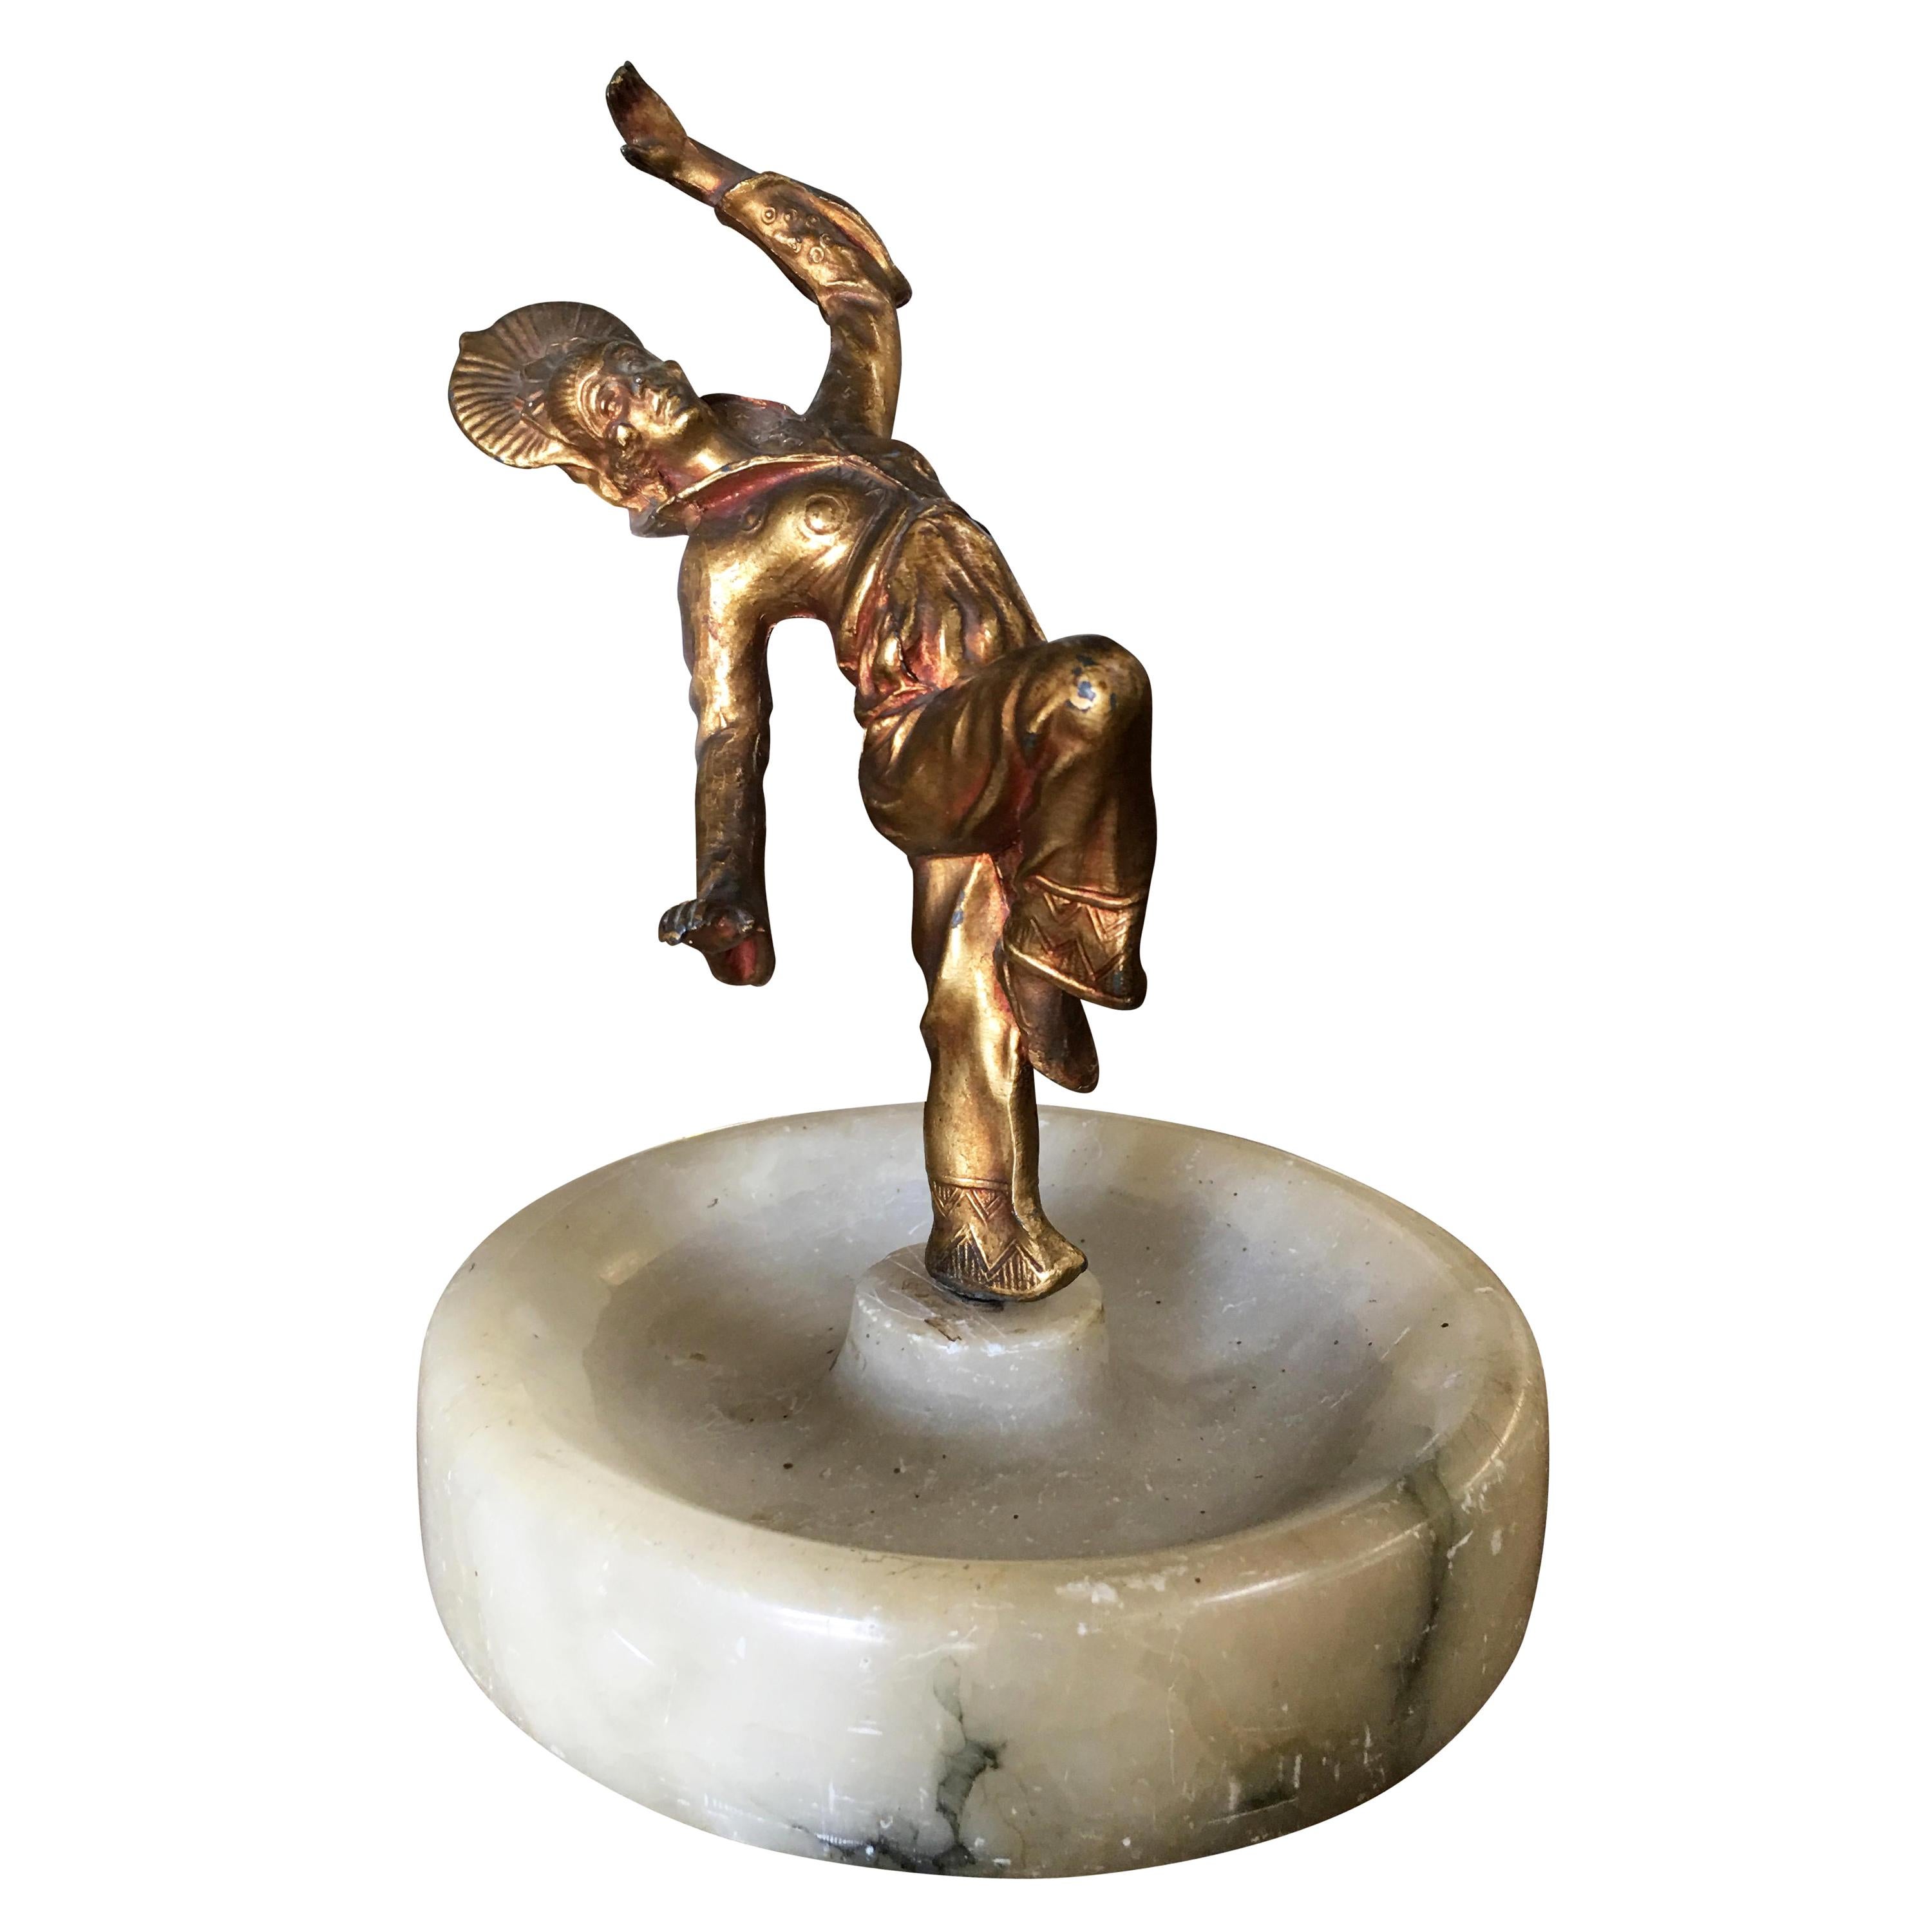 Art Deco Ashtray/Ring Tray with Female Harlequin Dancer Statue by Frankart